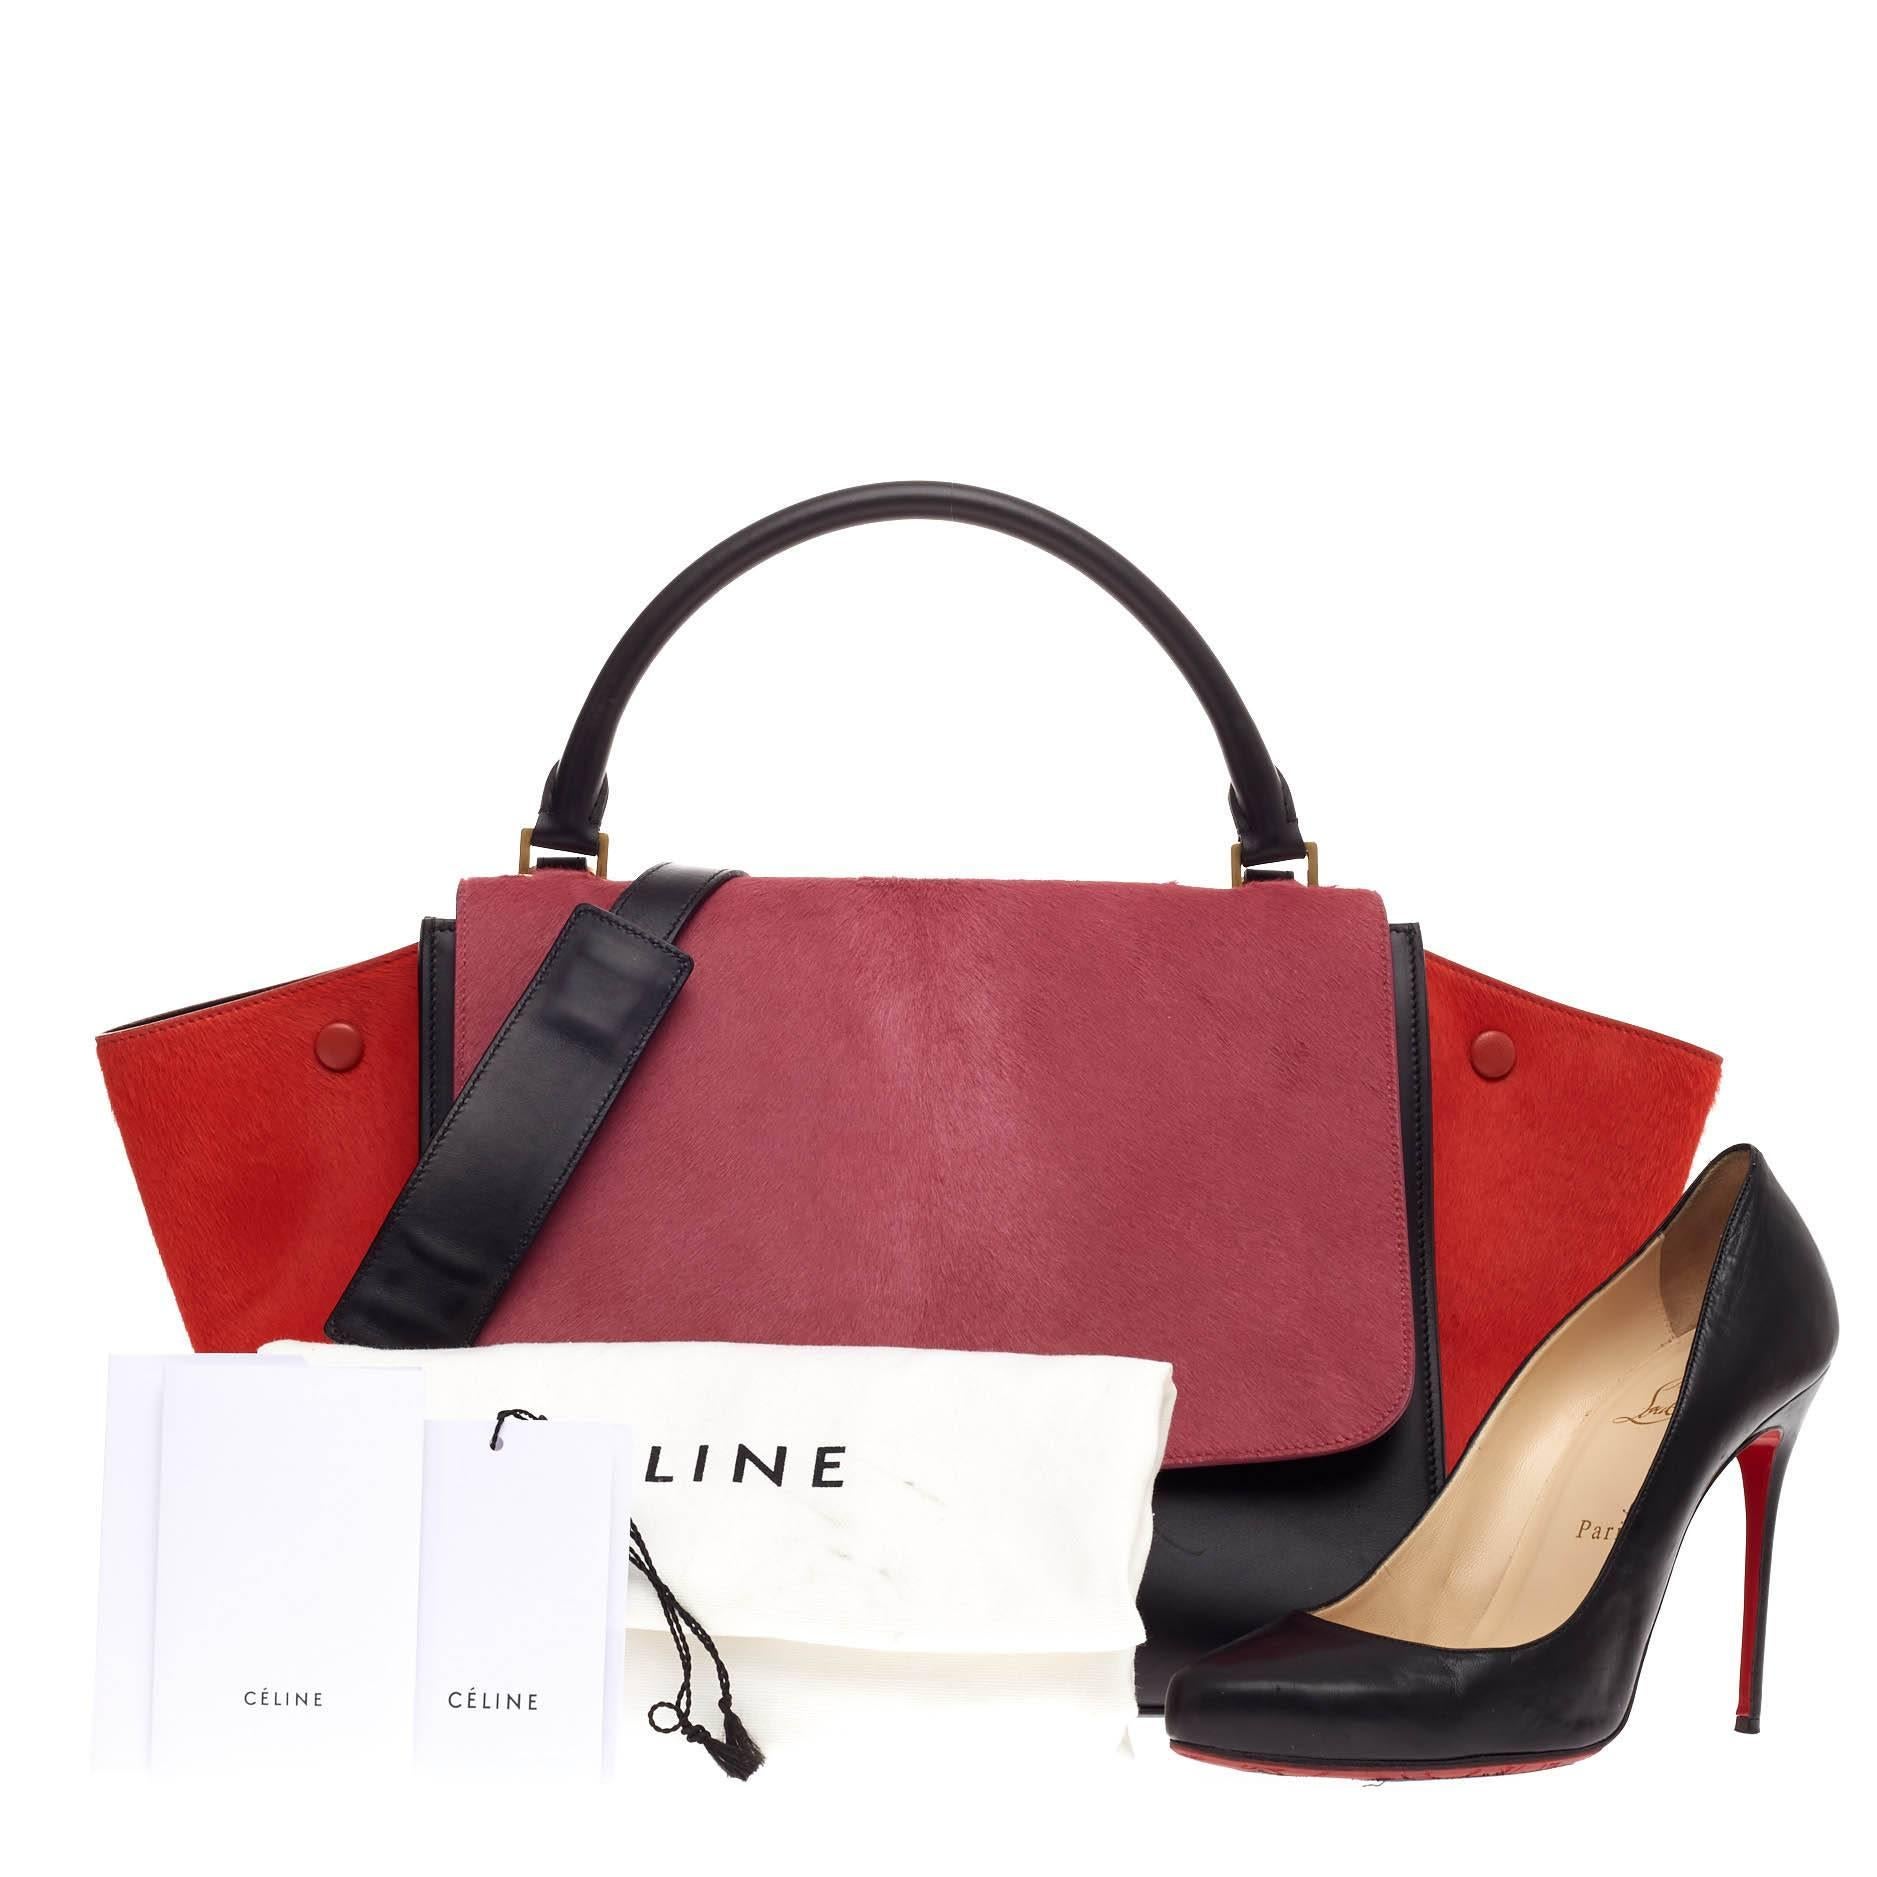 This authentic Celine Tricolor Trapeze Pony Hair Medium presented in the brand's 2014-2015 Collection is a modern minimalist design with a playful twist in an array of subdued colors. Crafted from pink and red pony hair and black leather, this